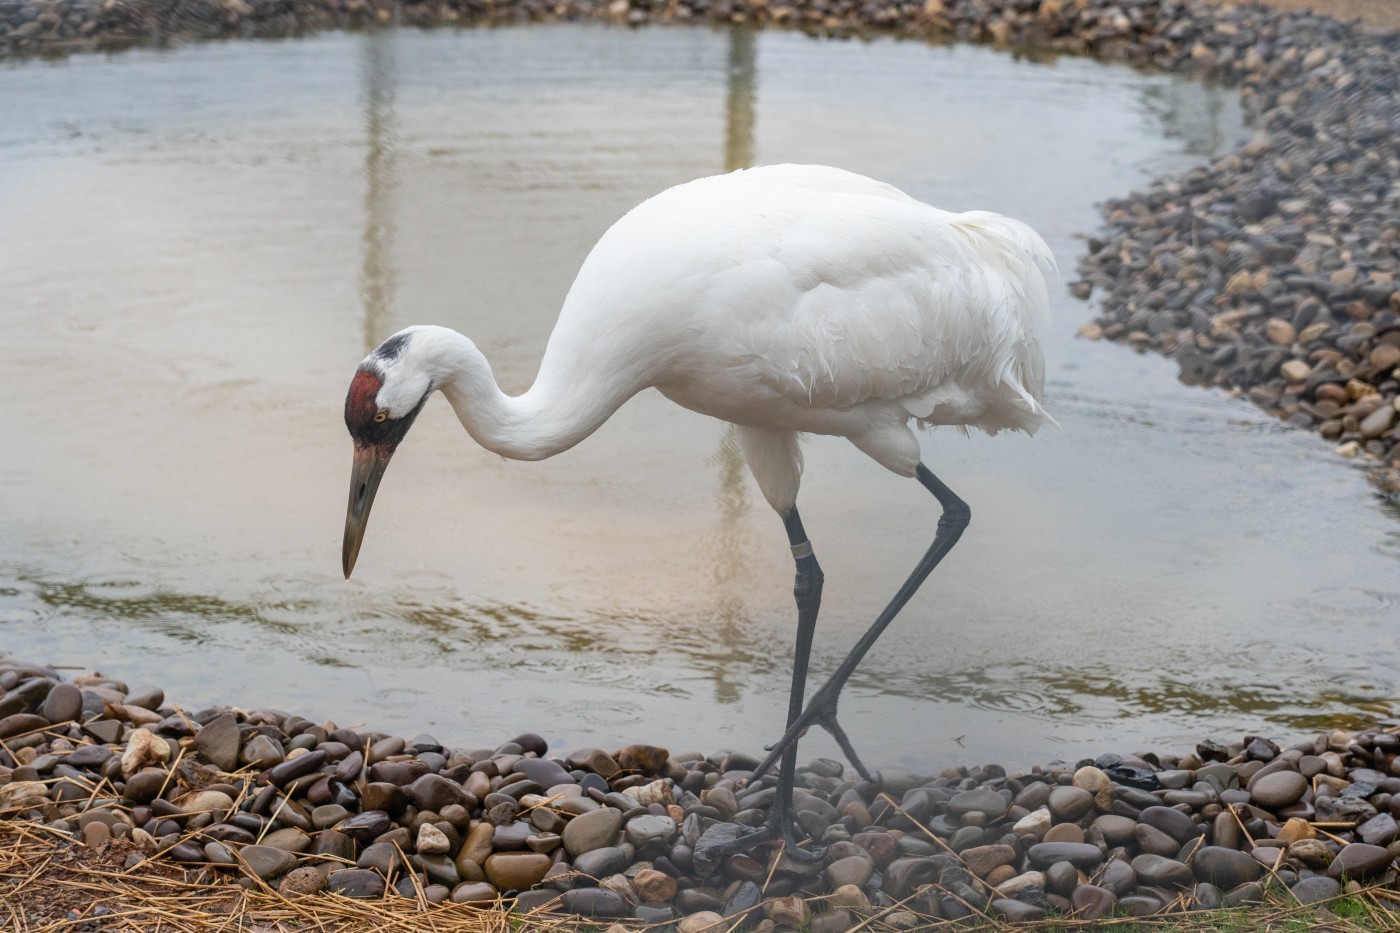 A whooping crane forages for food near a pond.